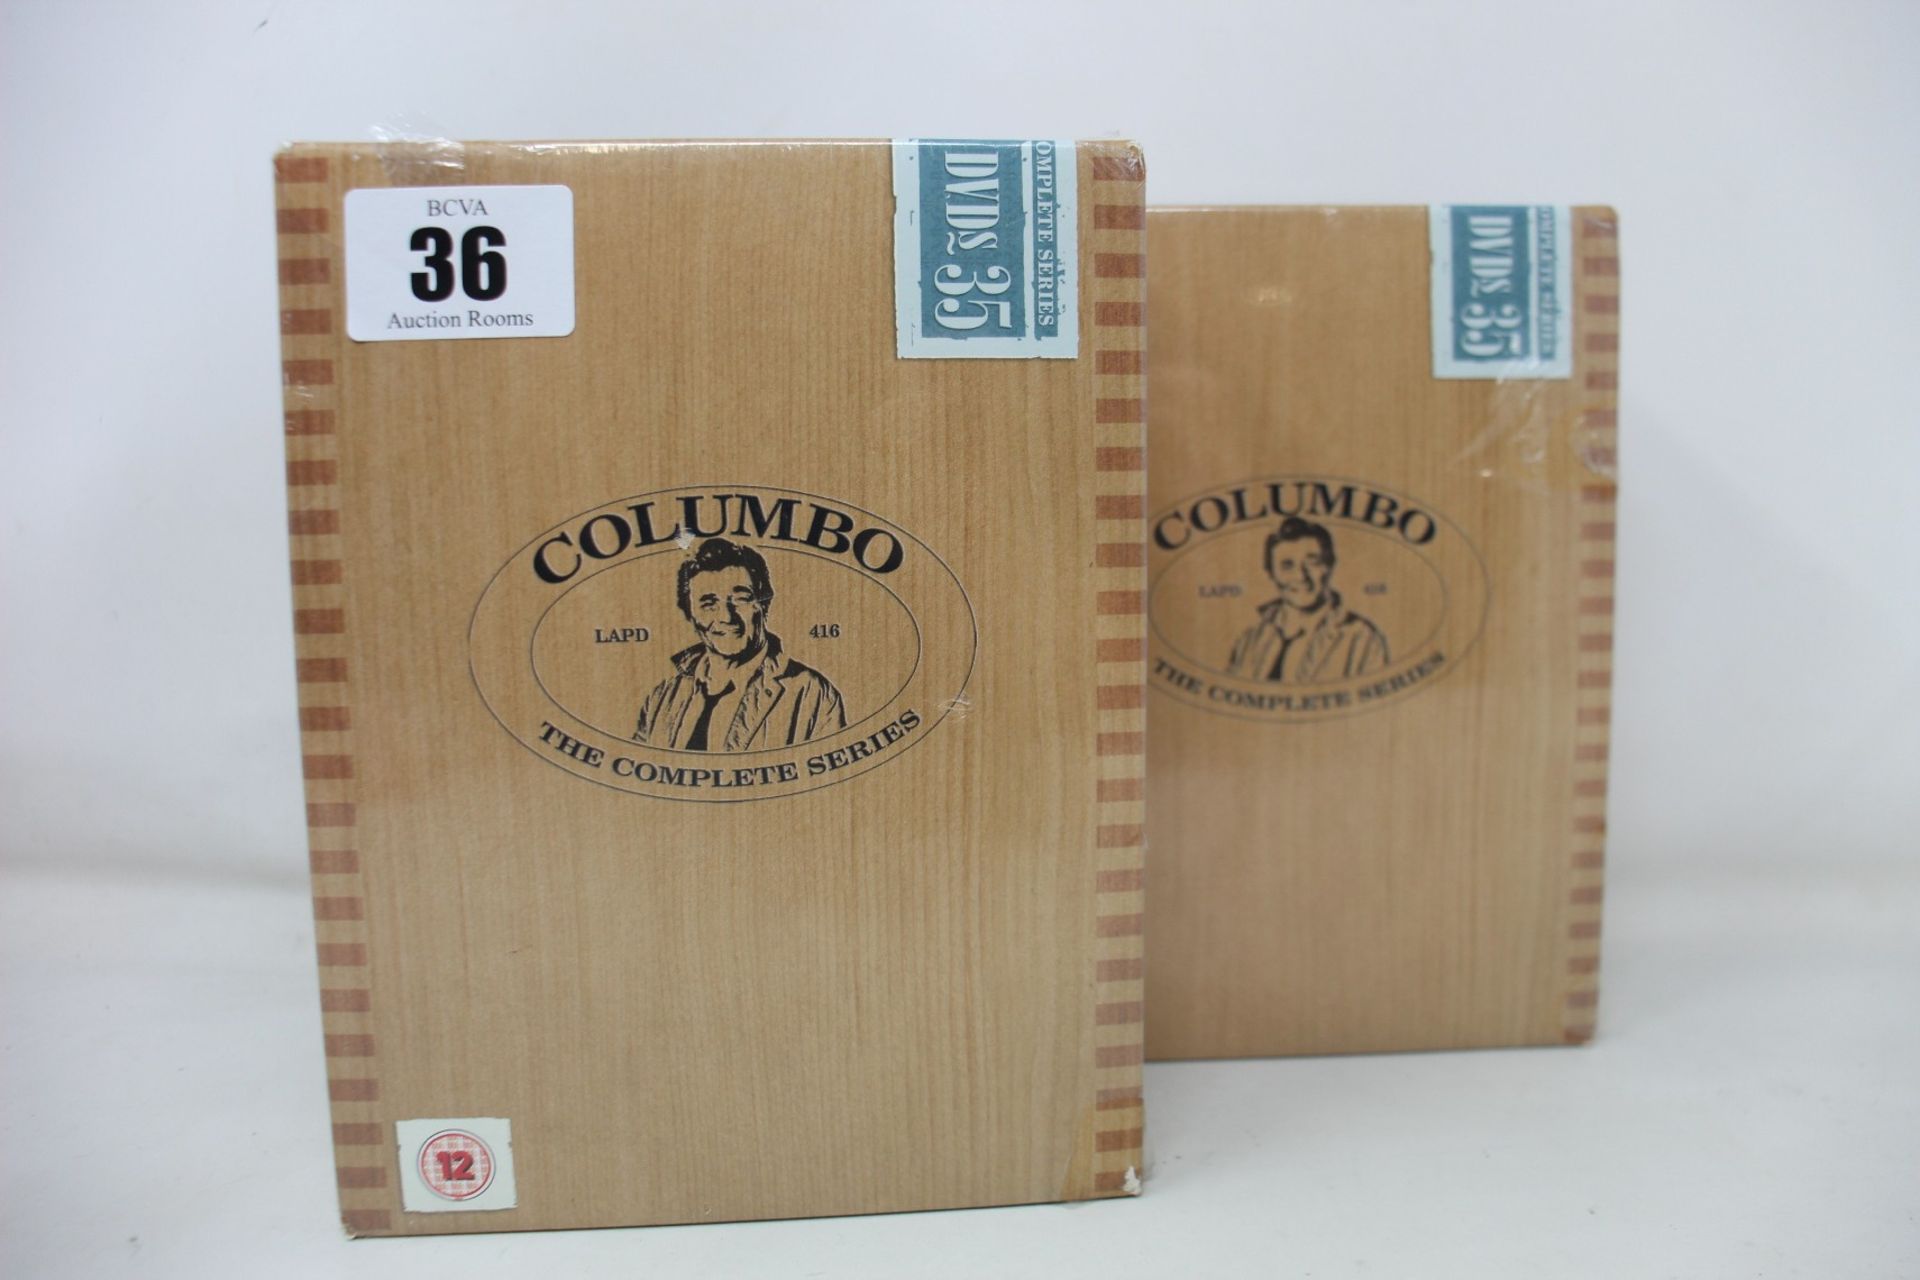 Four Columbo The Complete Series 35 DVD box sets (3 still sealed, all have minor damage to box).